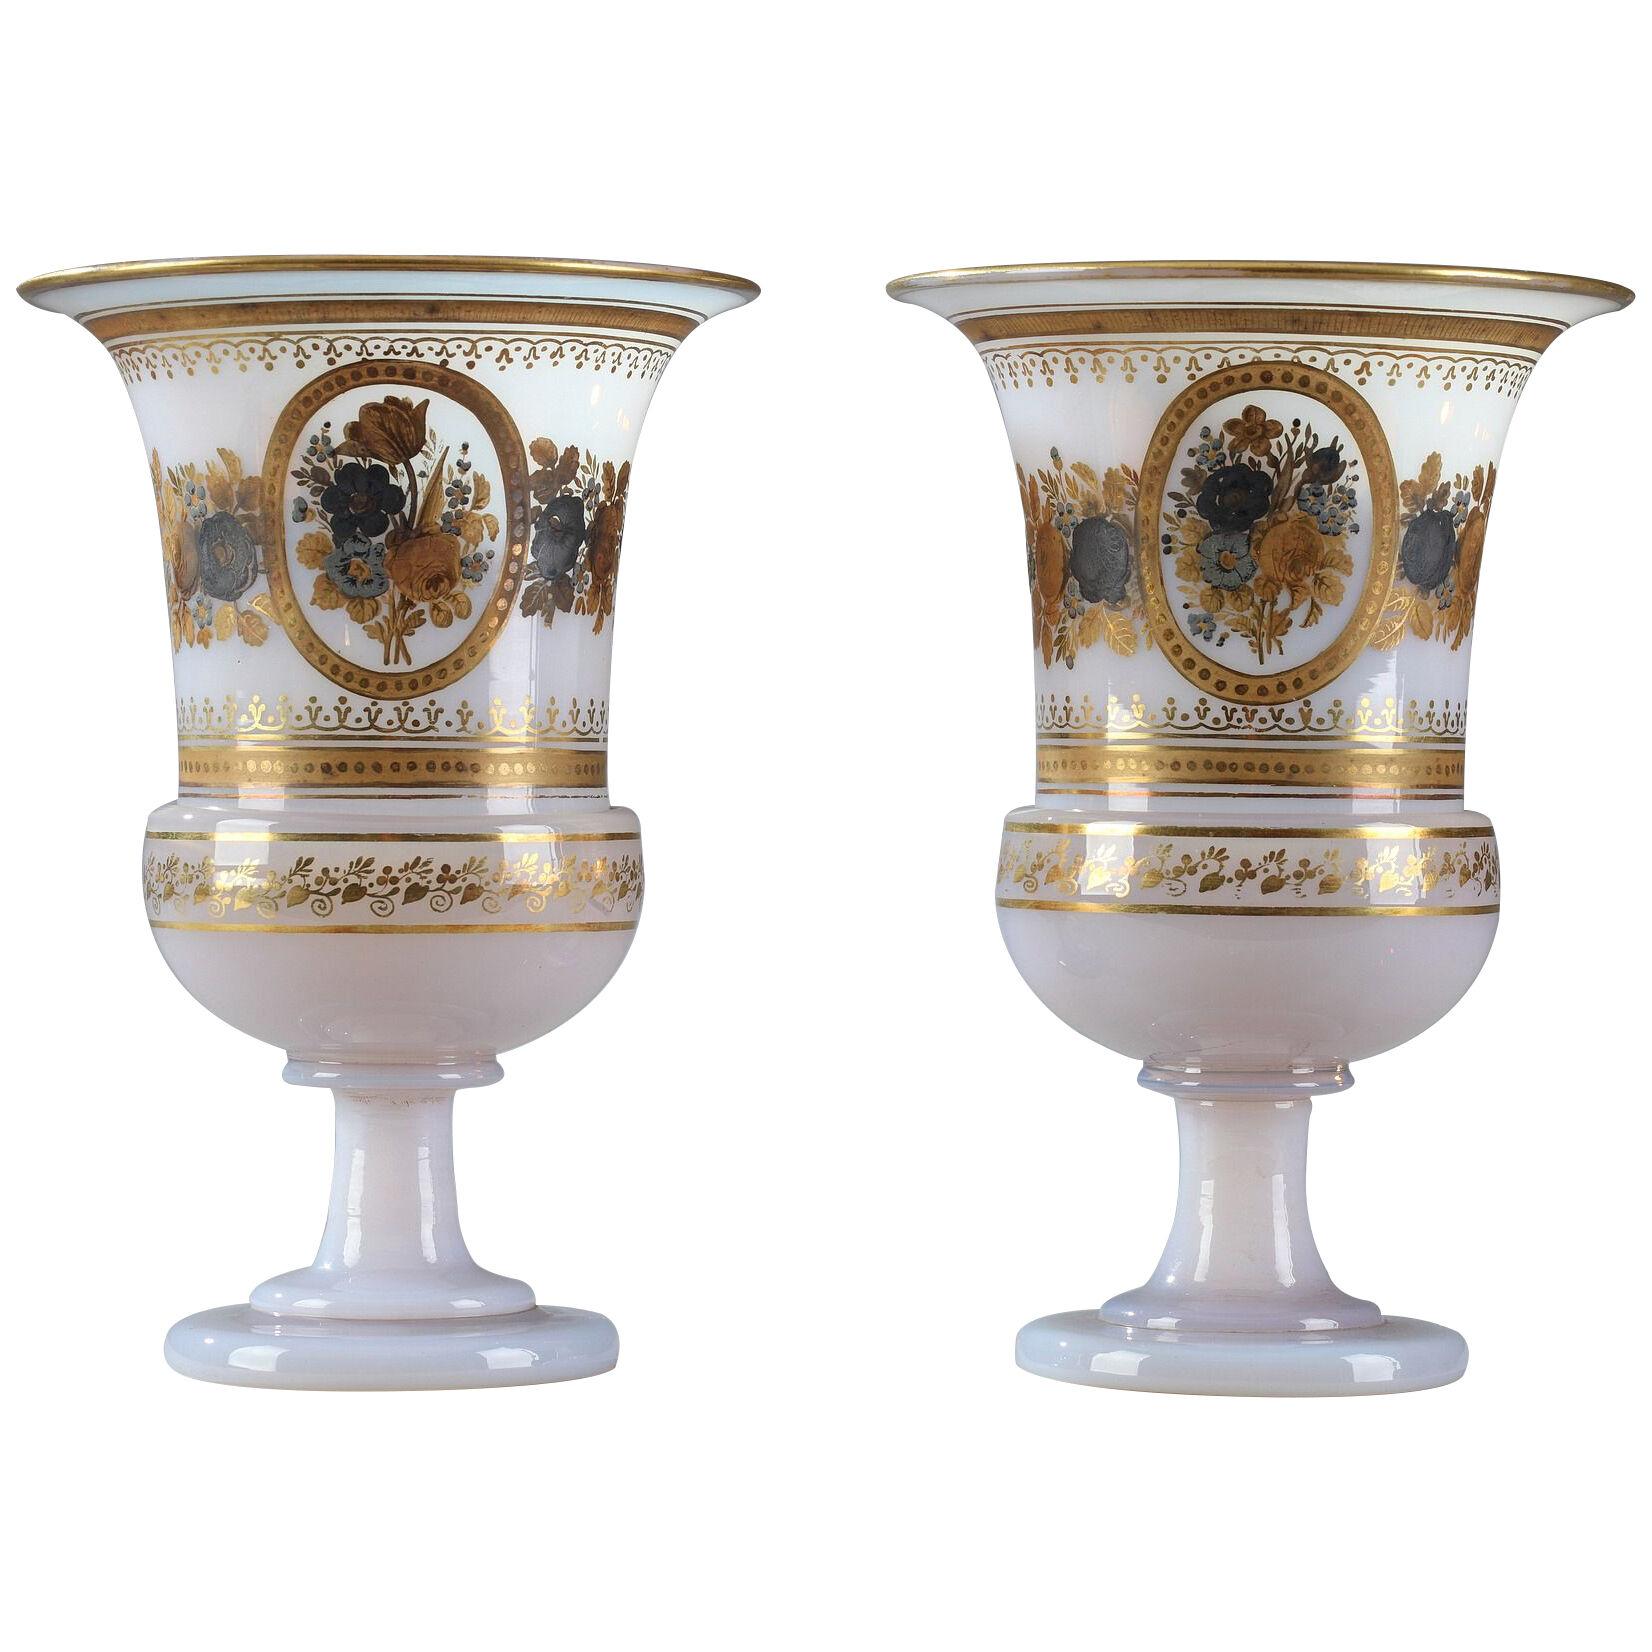 Pair of Medici Vases in White Opaline by Jean-Baptiste Desvignes